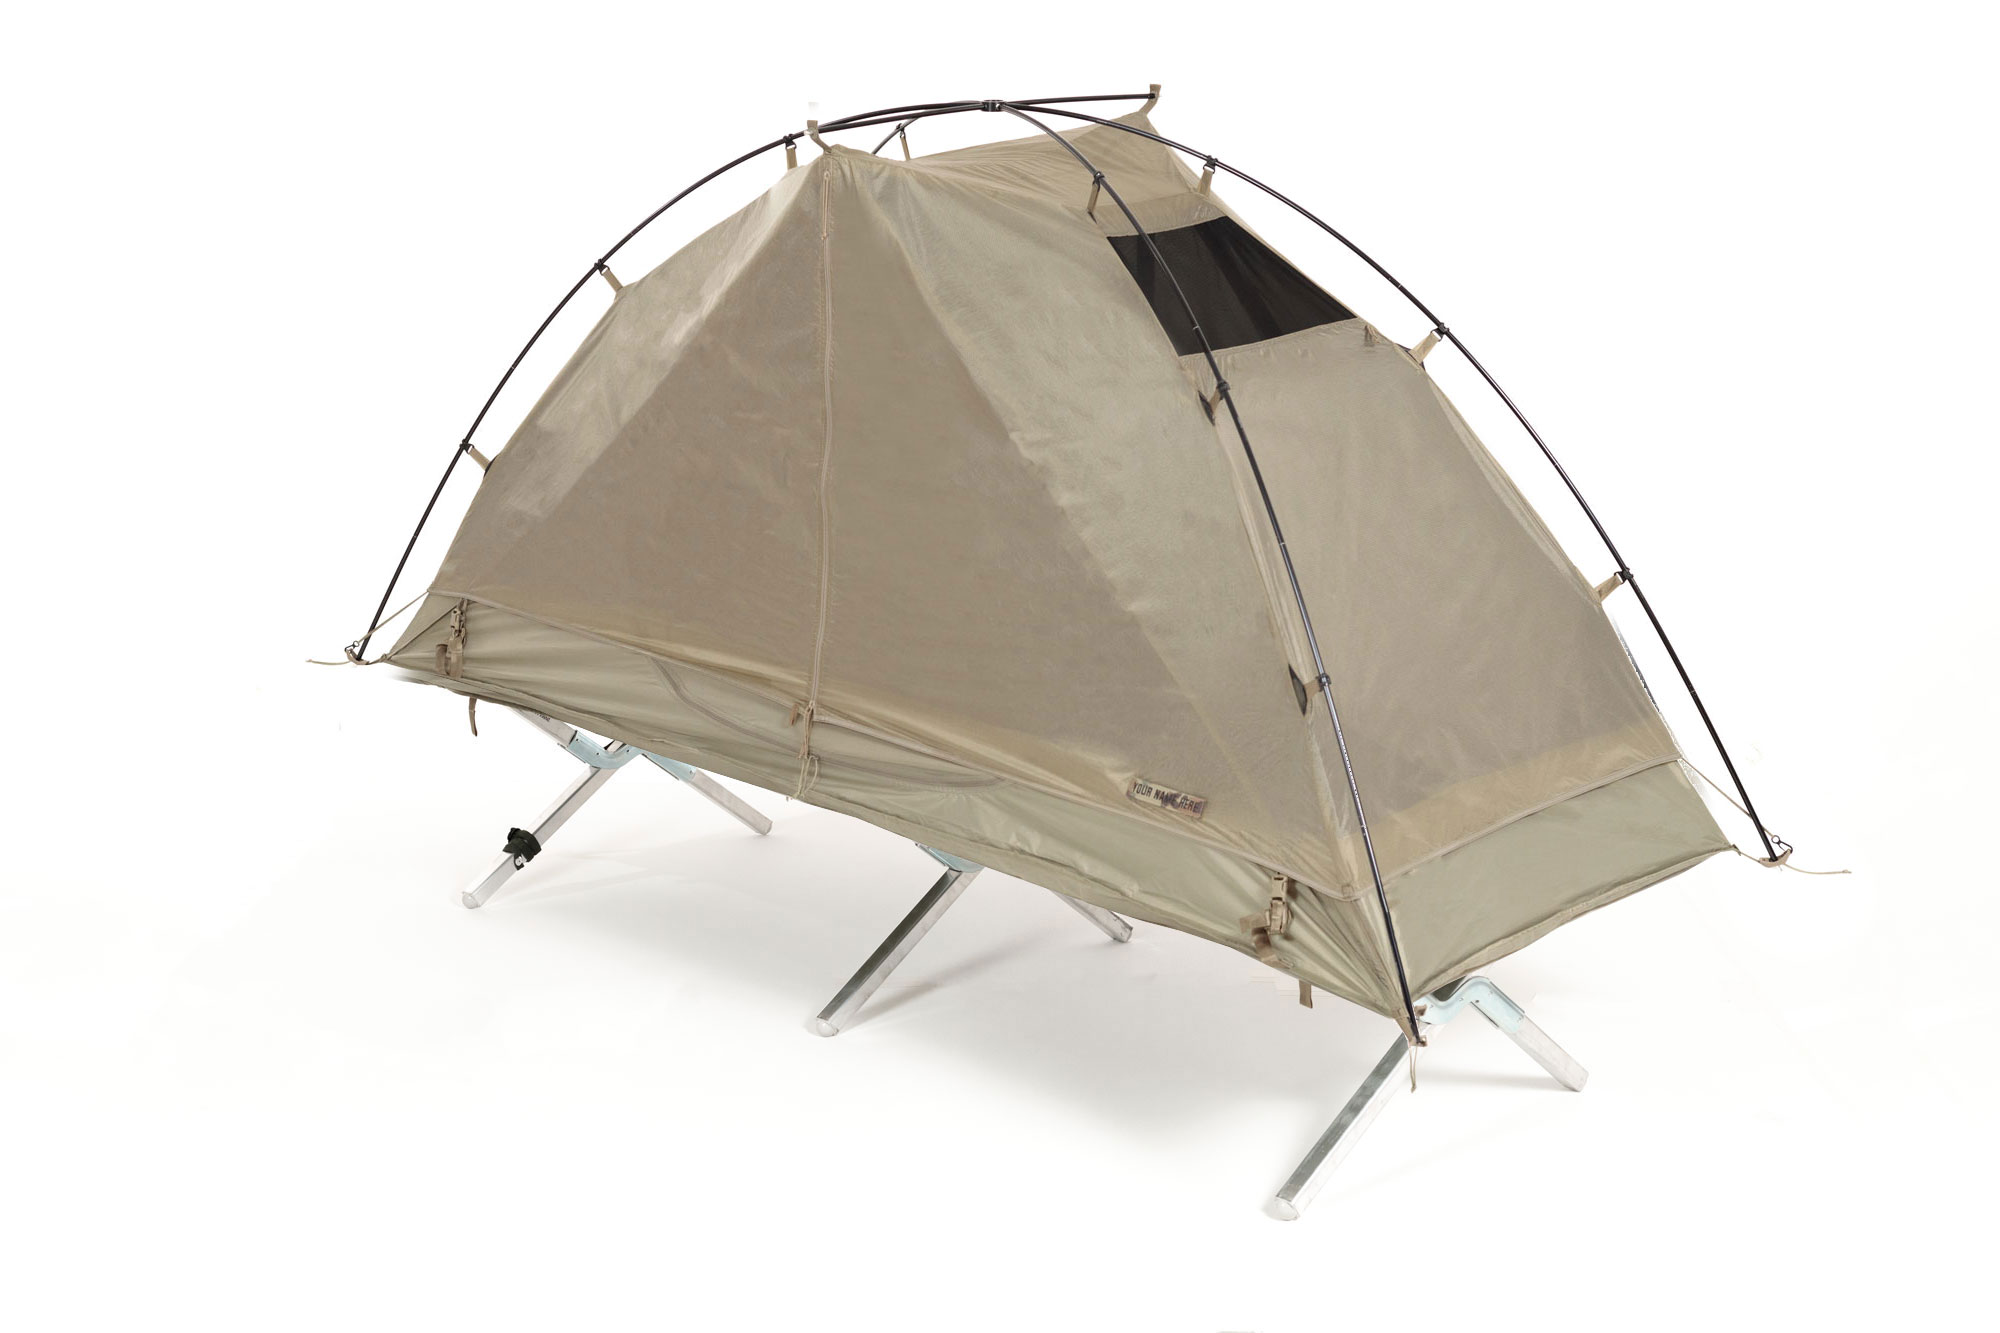 New TAN Litefighter 1 Individual Shelter Tent Mint Condition. 